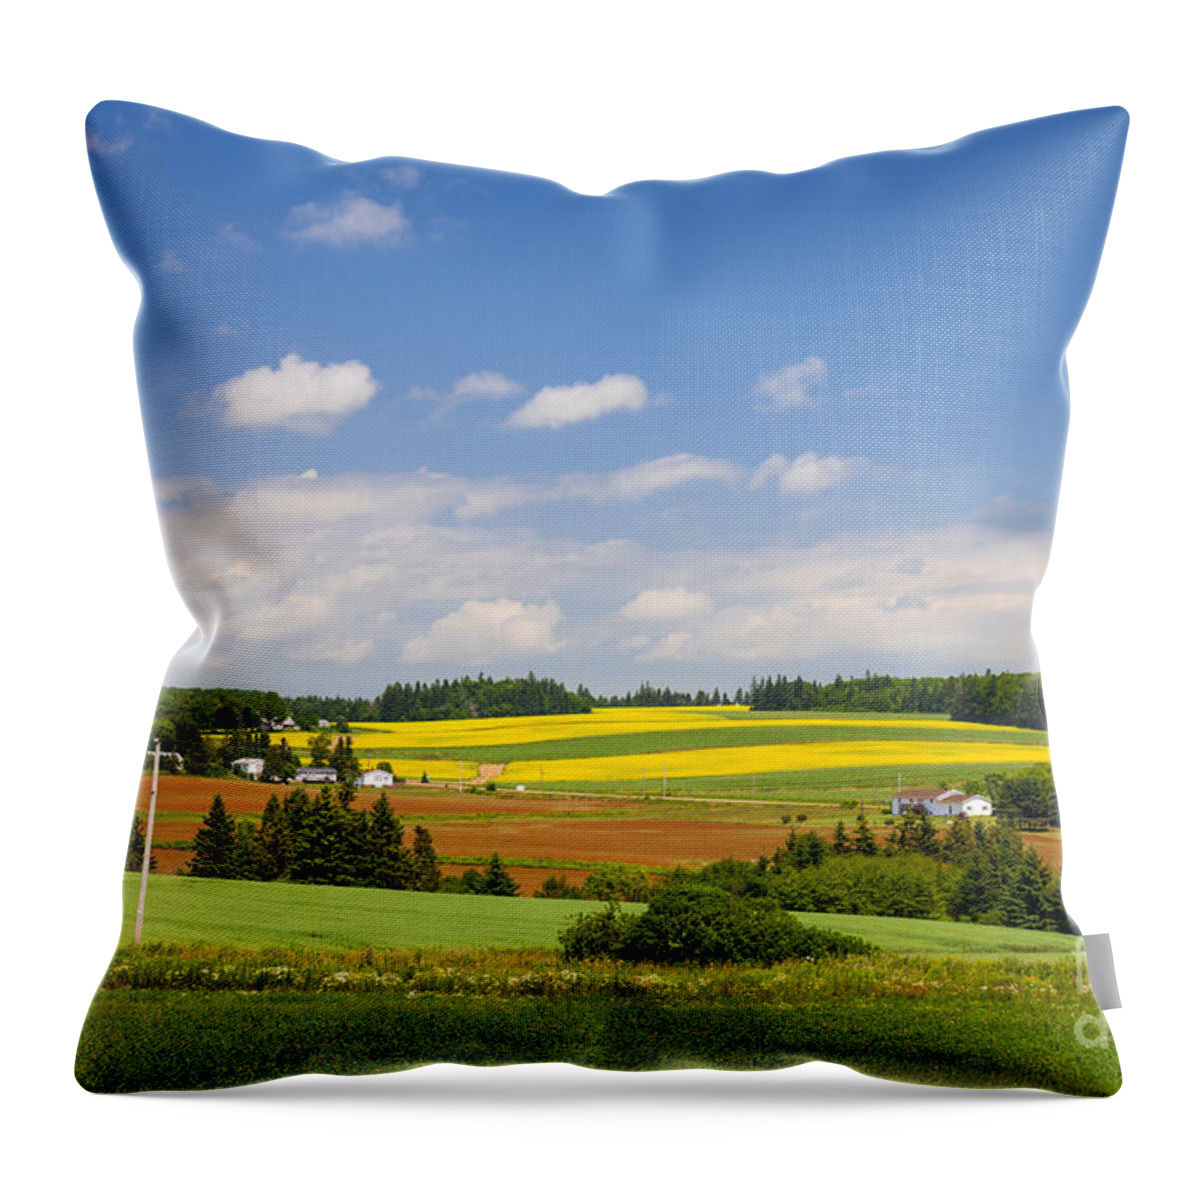 Pei Throw Pillow featuring the photograph Rural landscape 1 by Elena Elisseeva